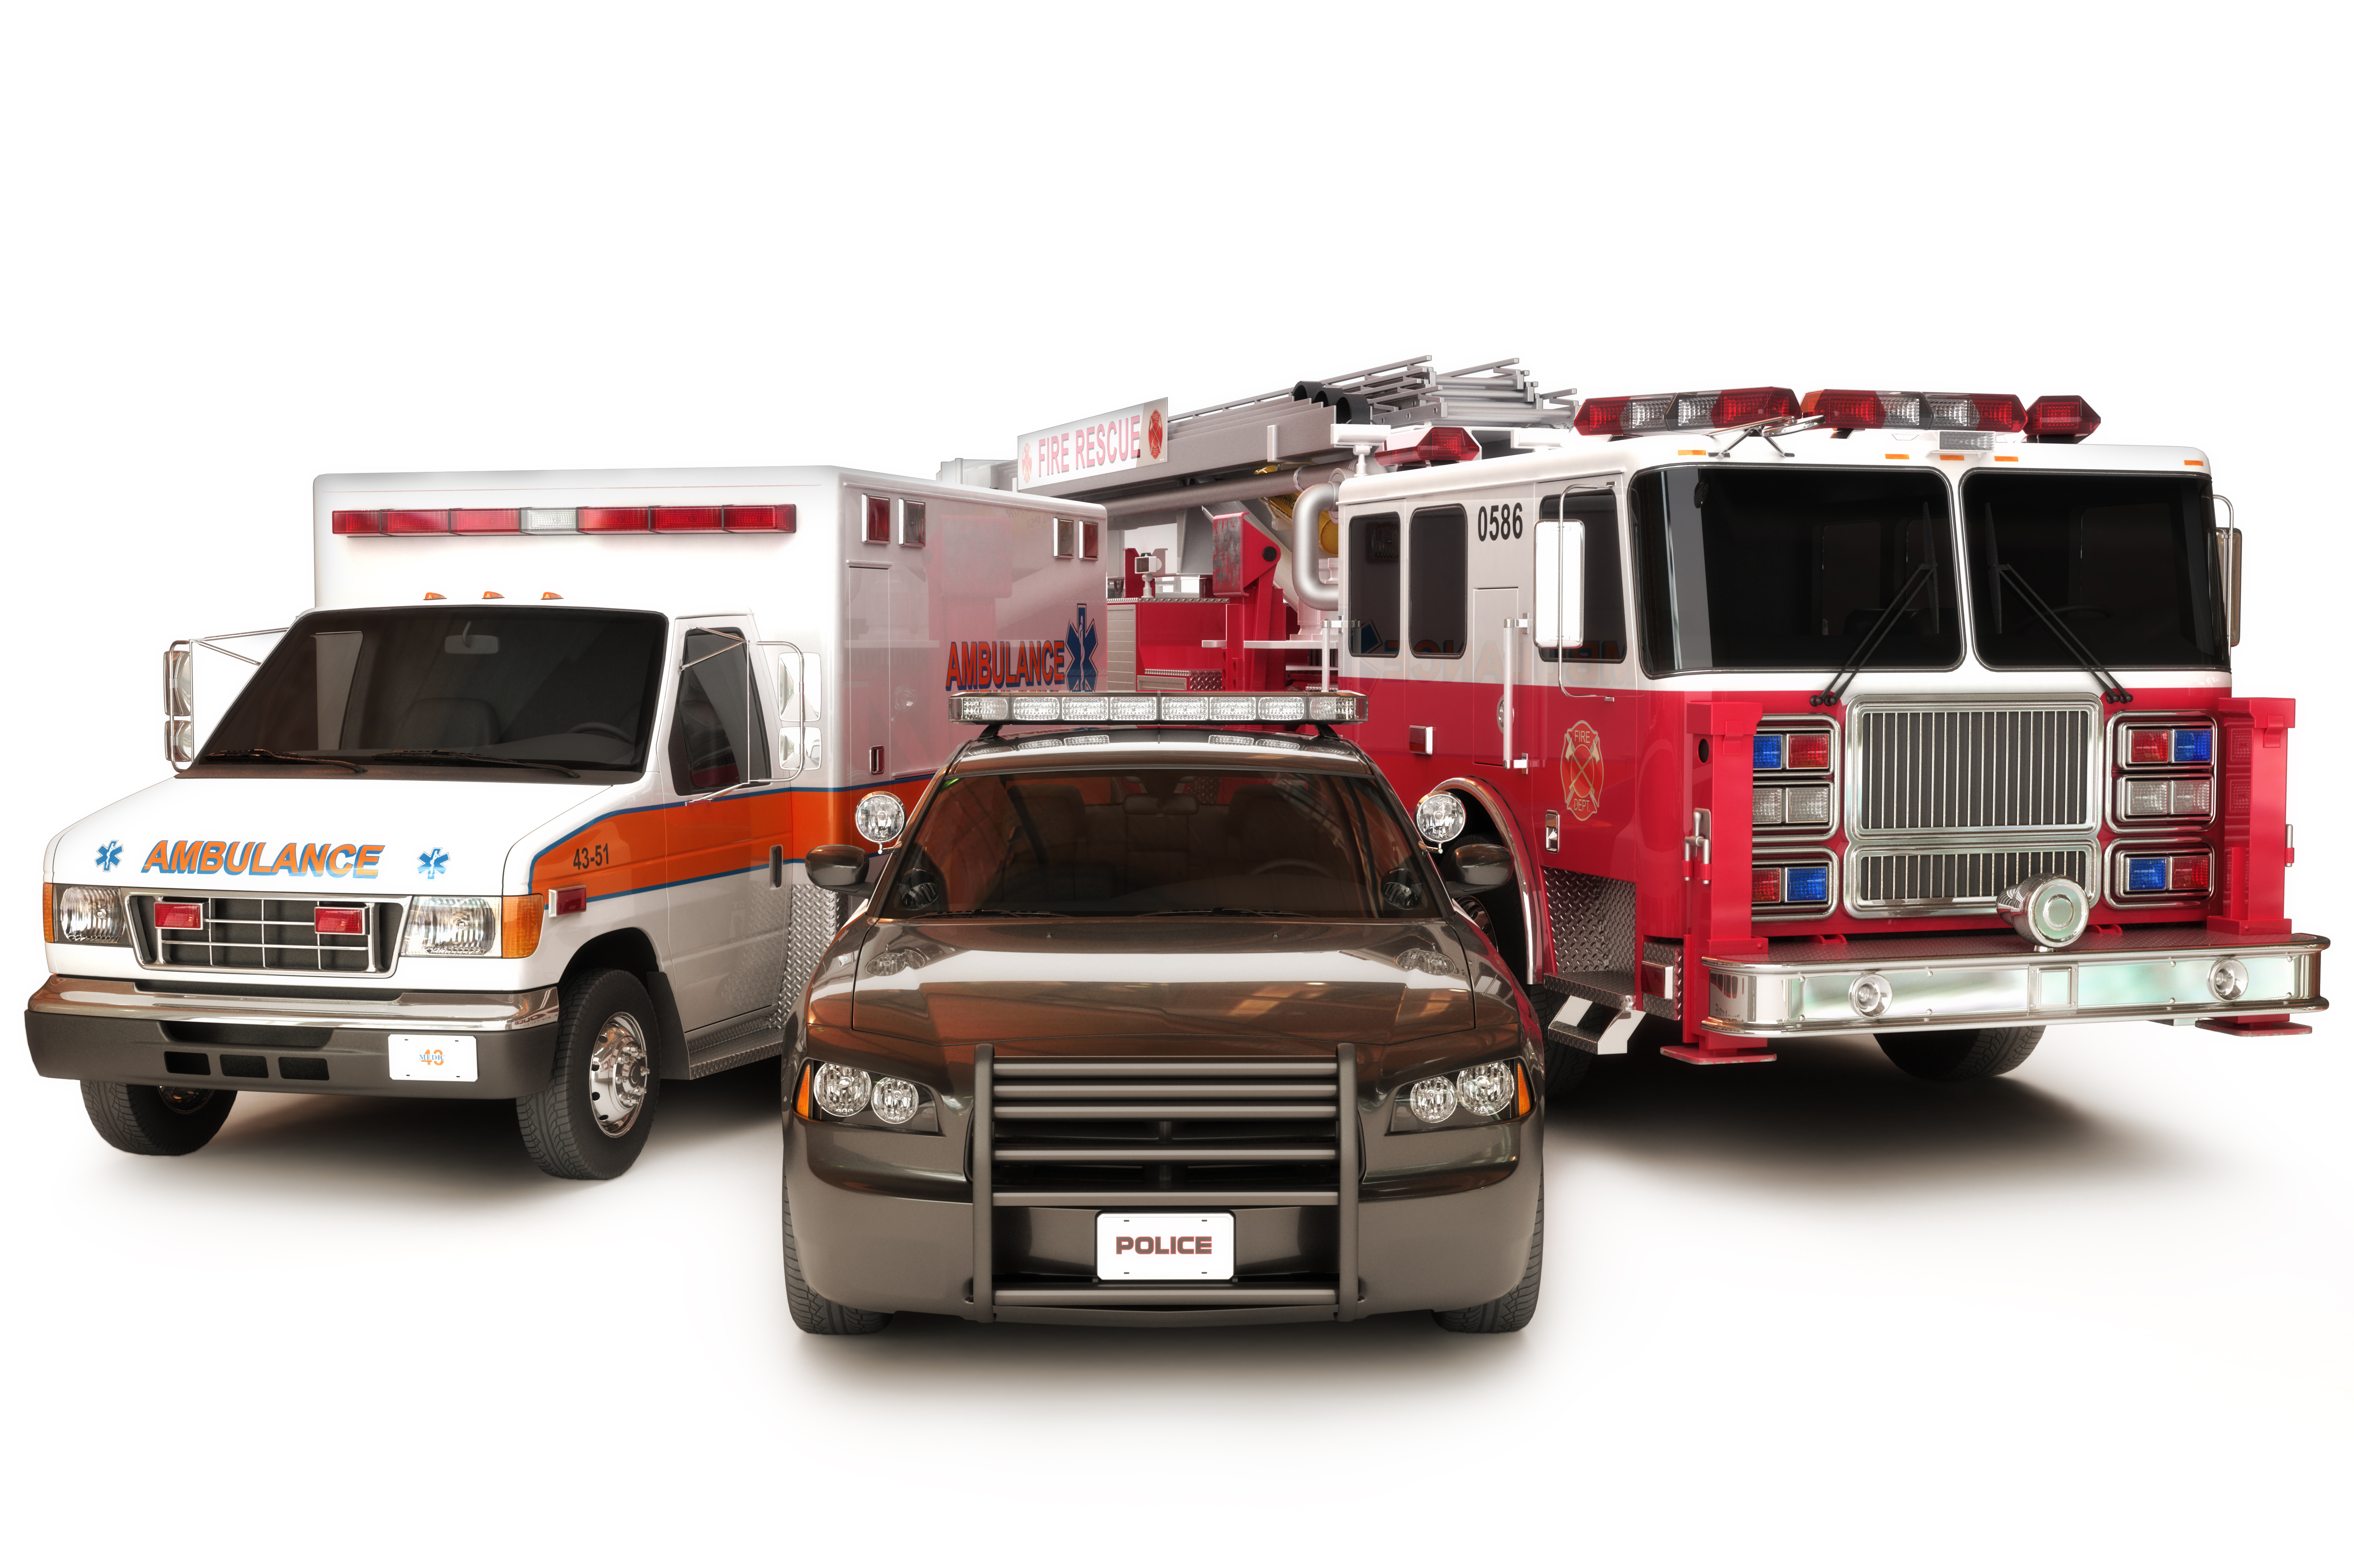 An image of an ambulance, police vehicle and fire truck